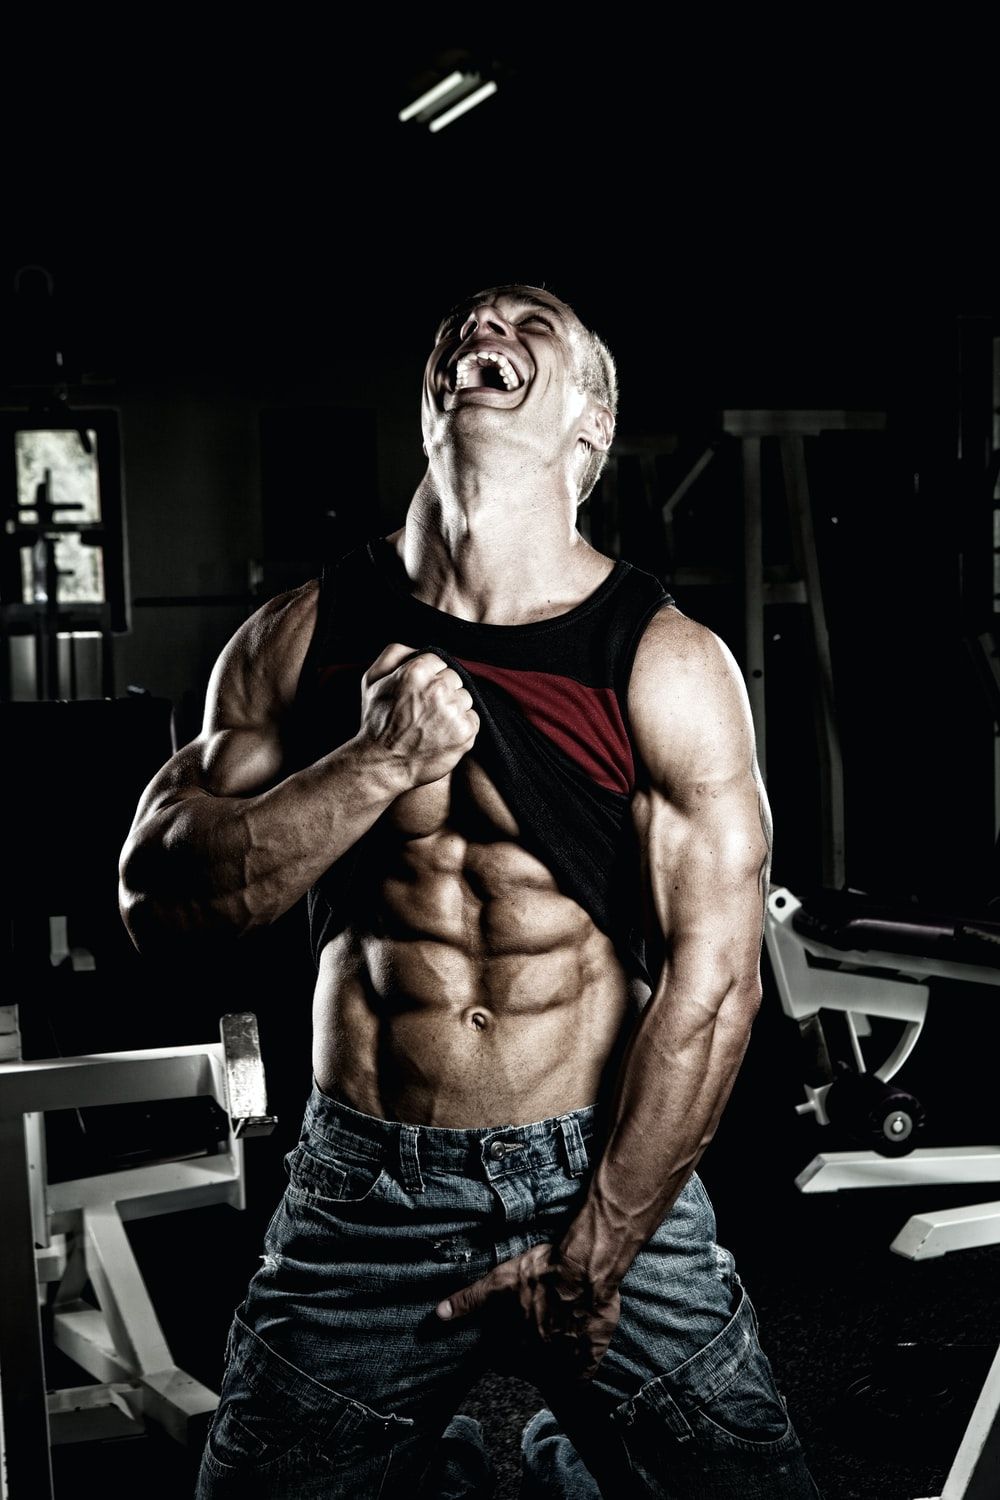 Fitness Model Picture. Download Free Image